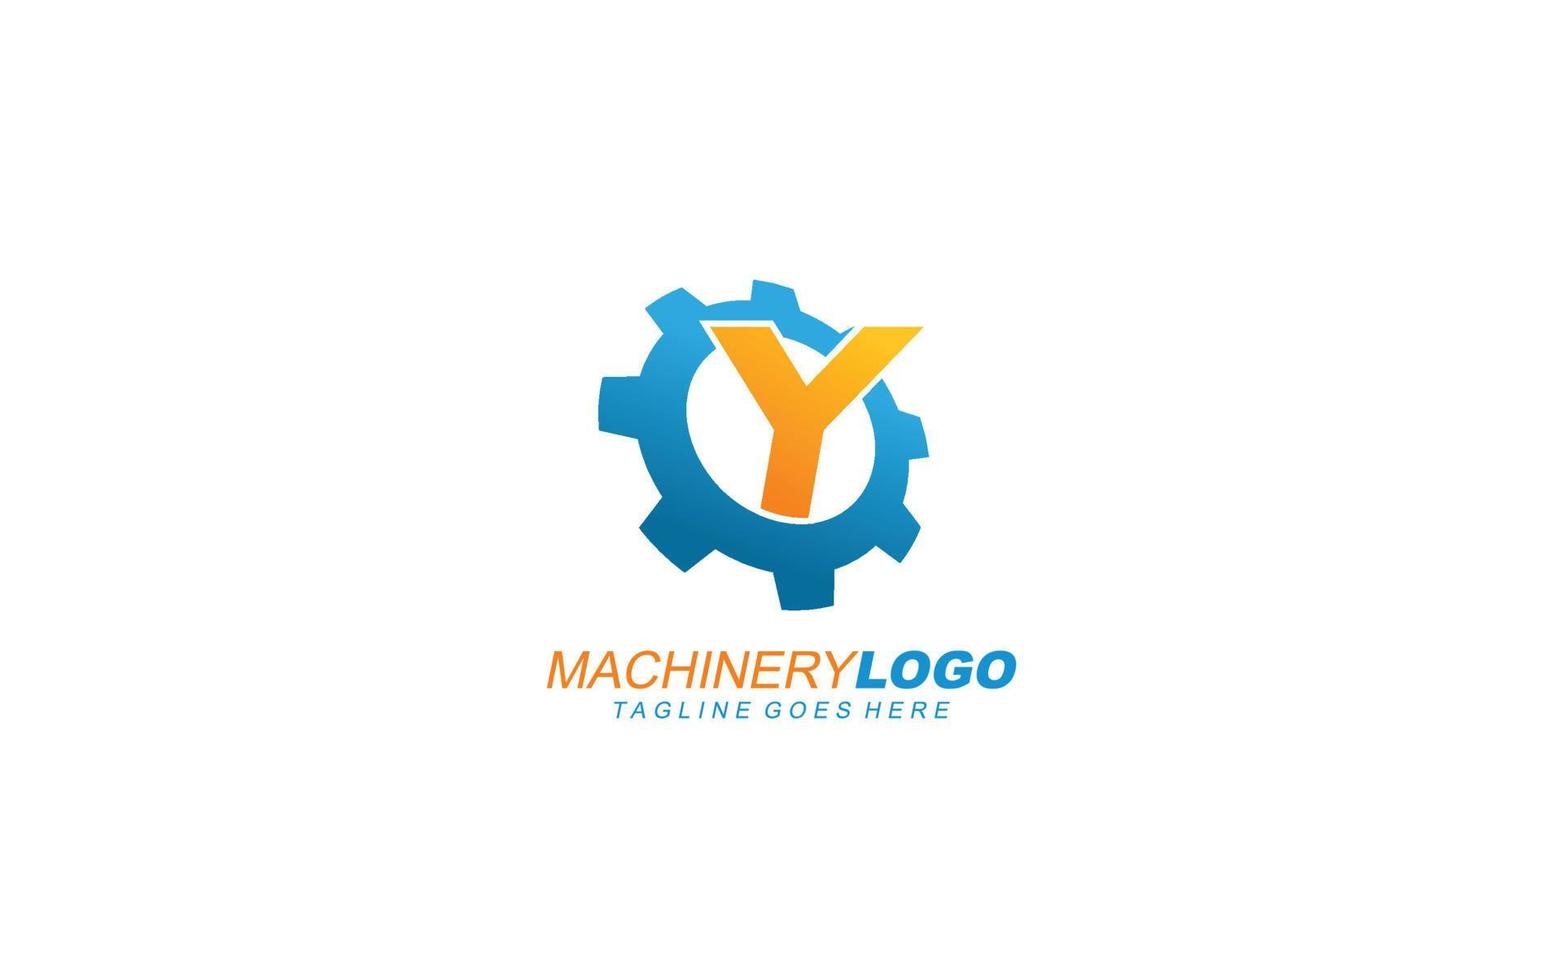 Y logo gear for identity. industrial template vector illustration for your brand.